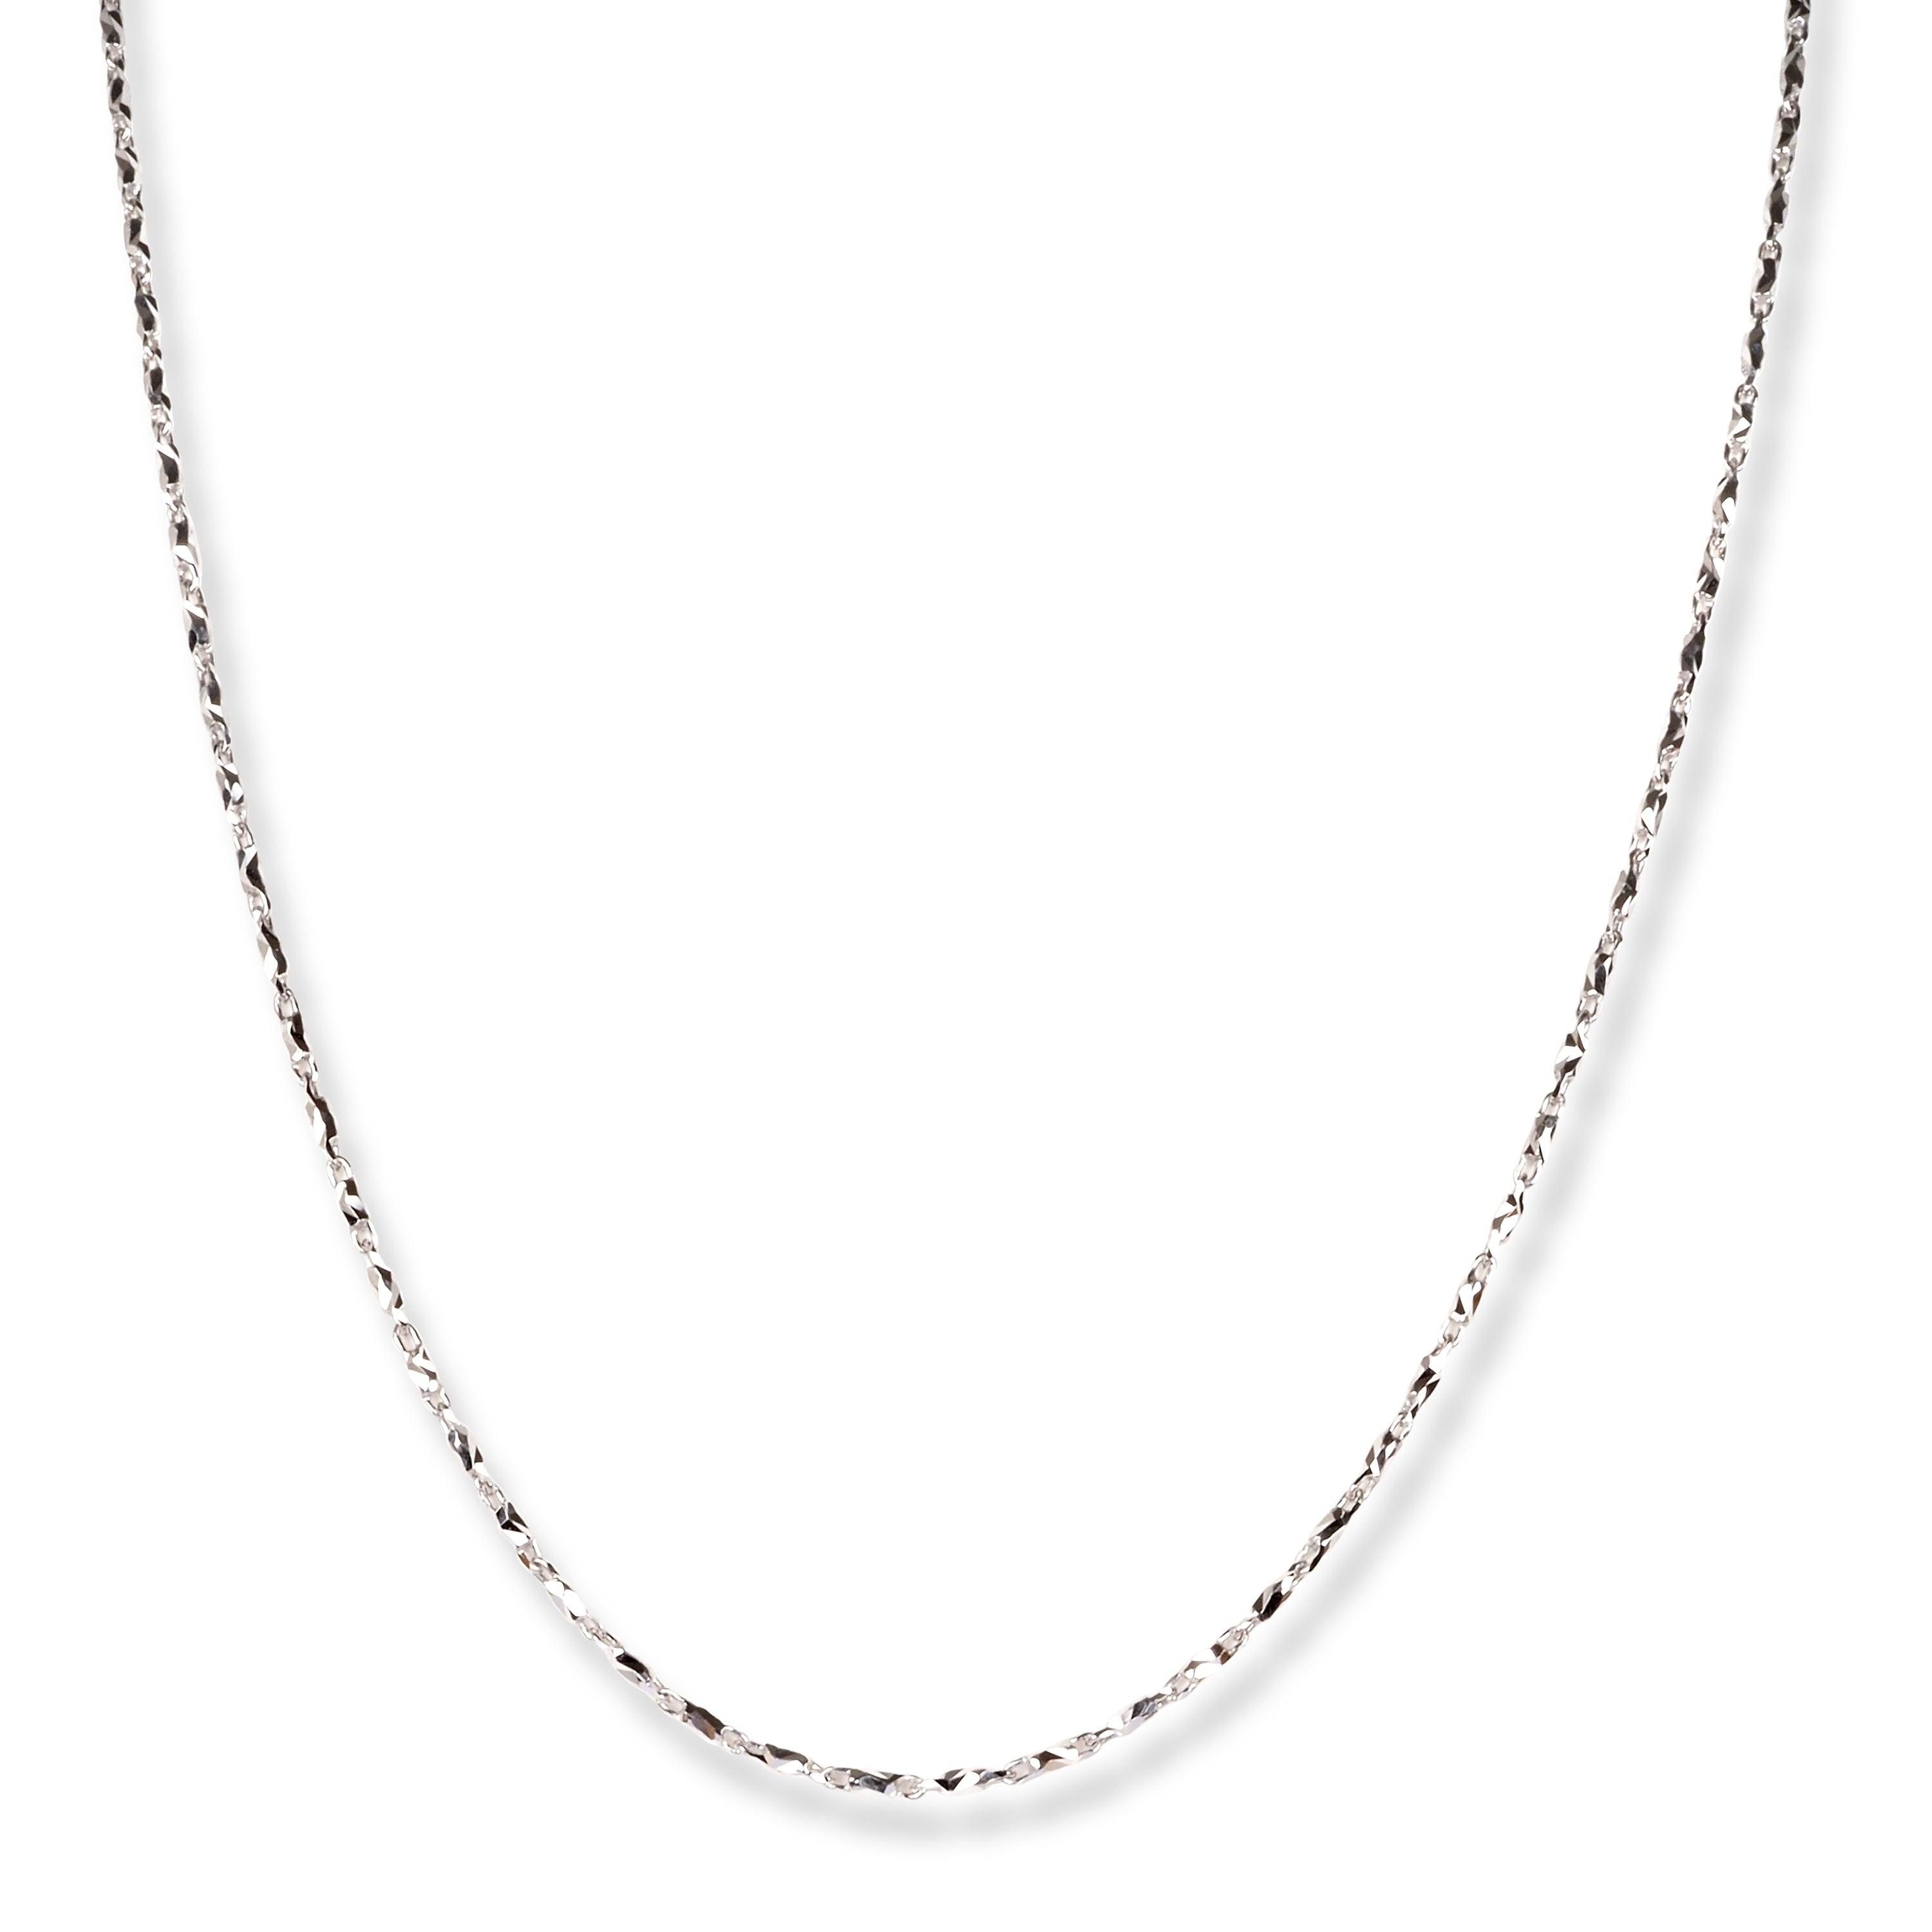 18ct White Gold Chain with Lobster Clasp C-3807 - Minar Jewellers